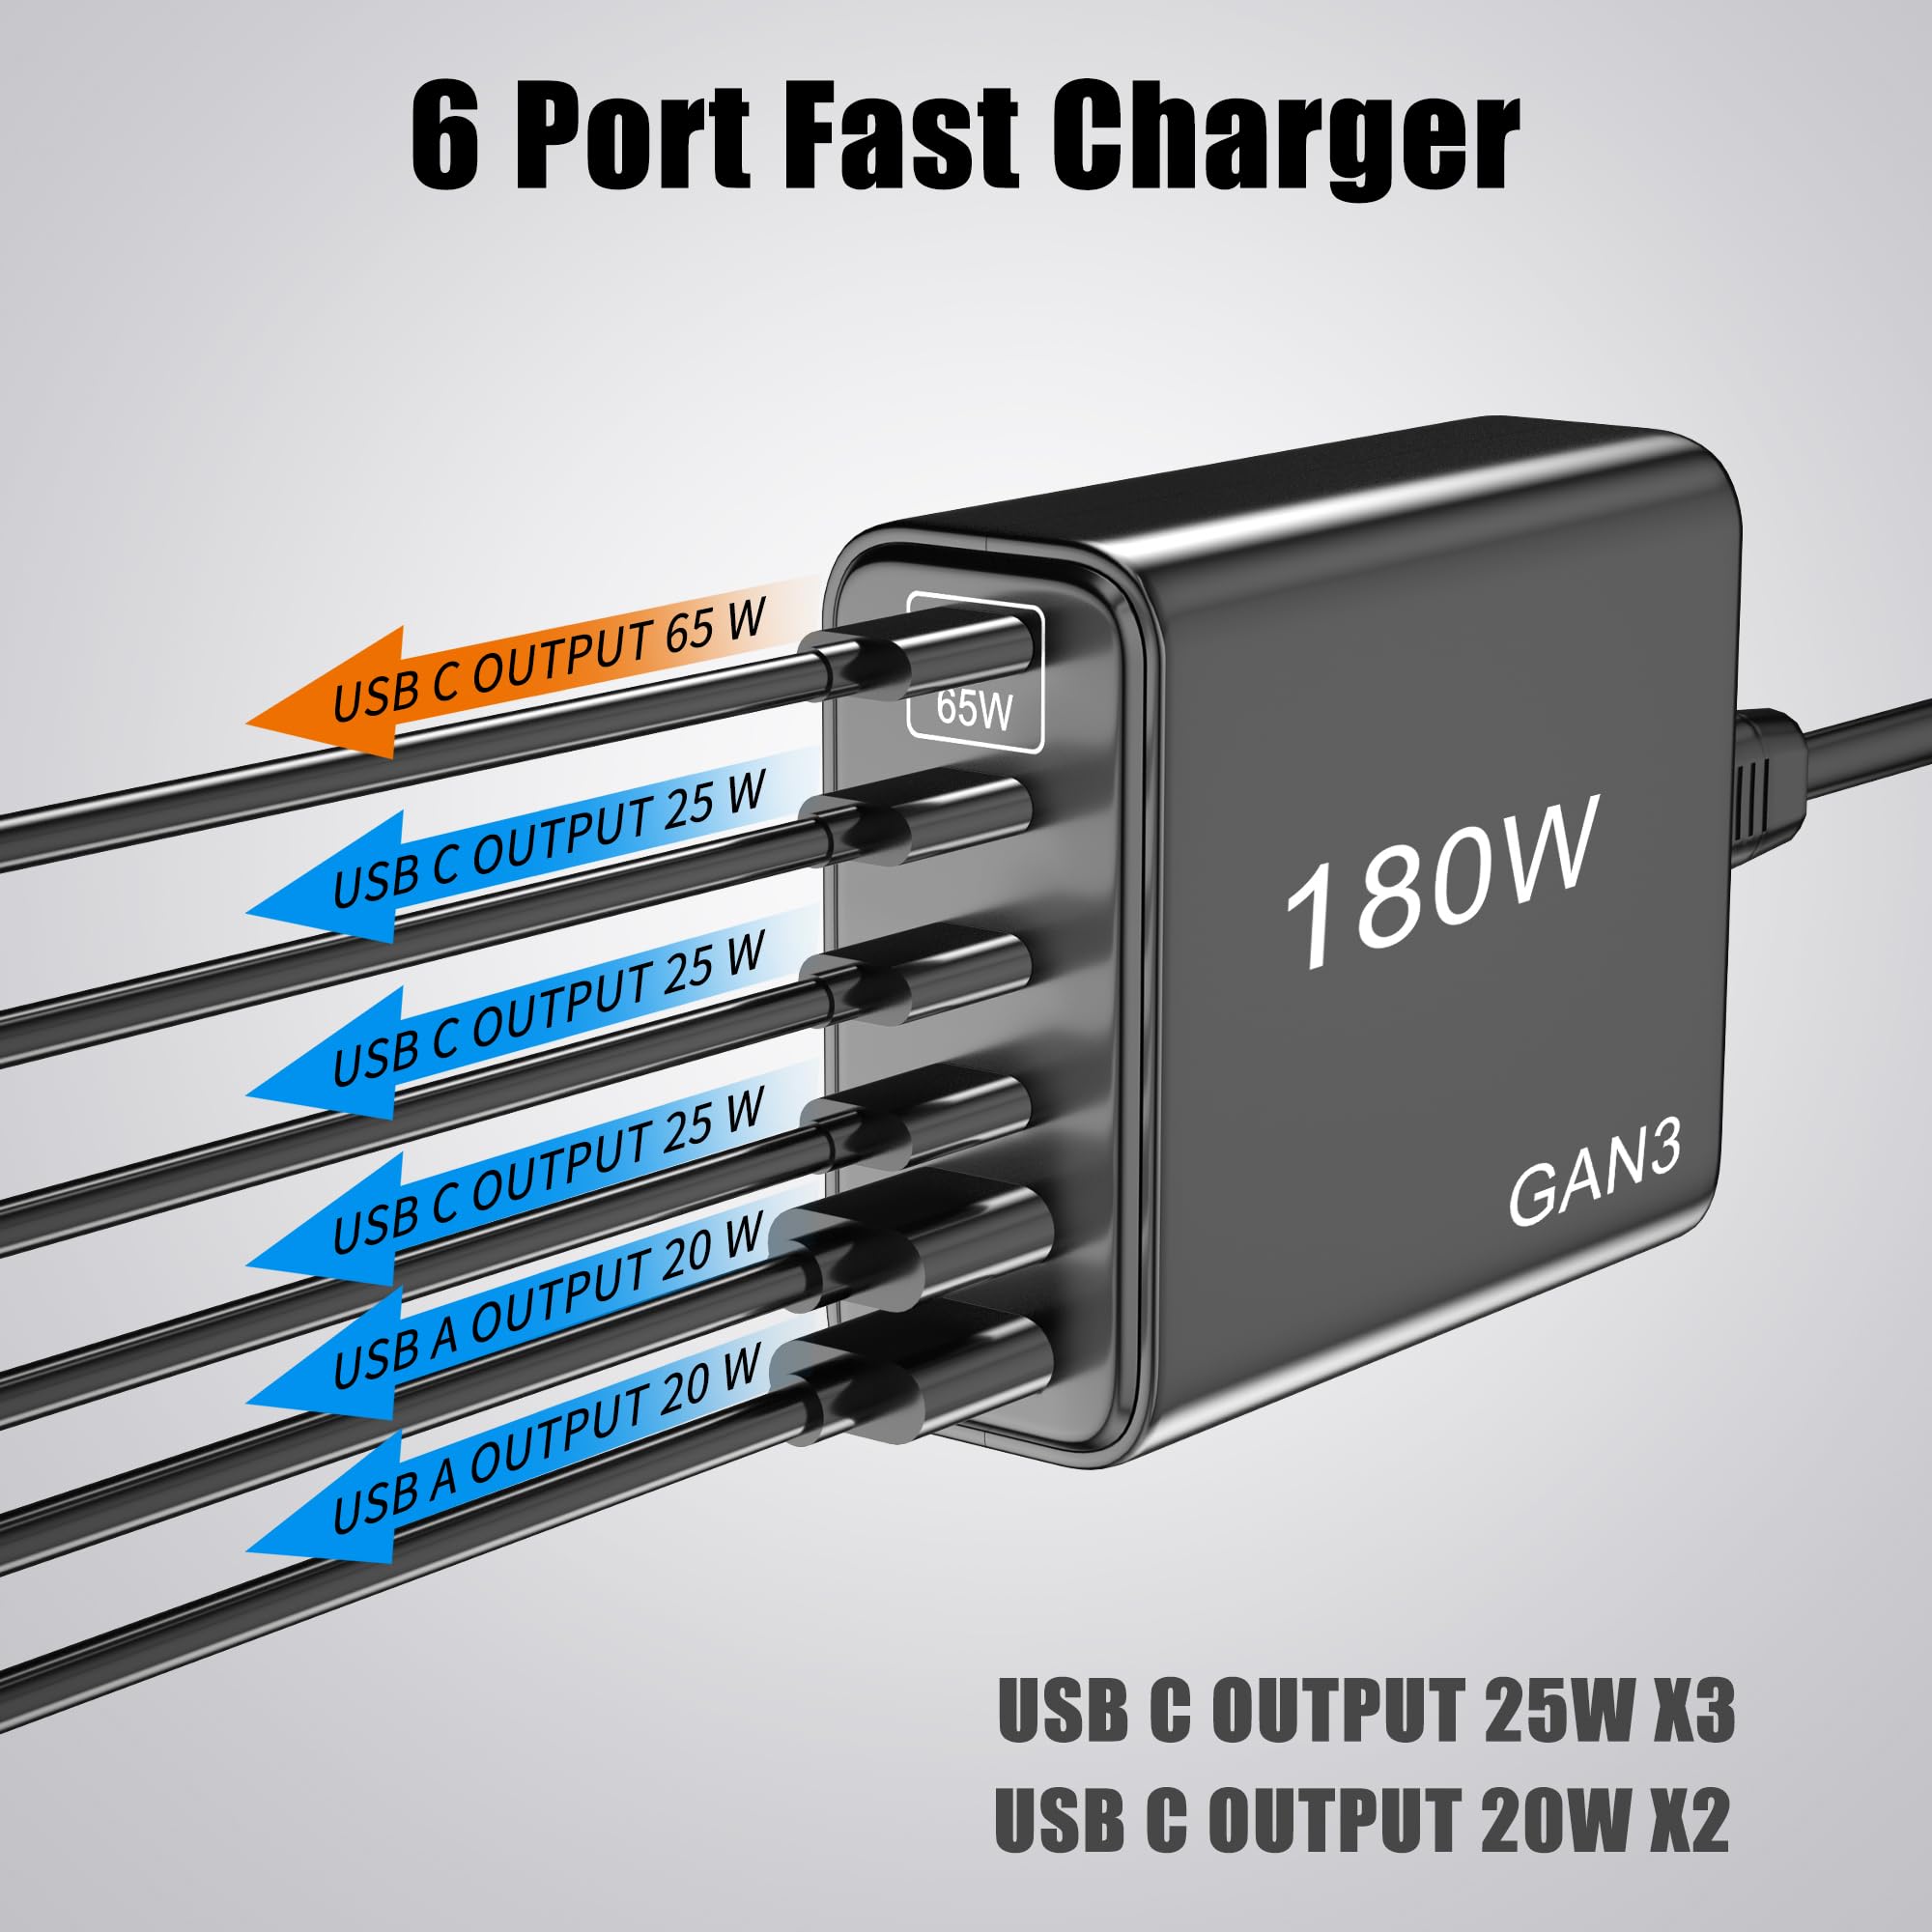 USB C Fast Charger 180W 6 Port GaN3 USB C Charger Compatible with Laptop,ipad, iPhone 14 13 12 11 Pro Max Fast Charging Blocks Pixel Note Galaxy MacBook Pro/Air USB C Charger Block Sumsung Android